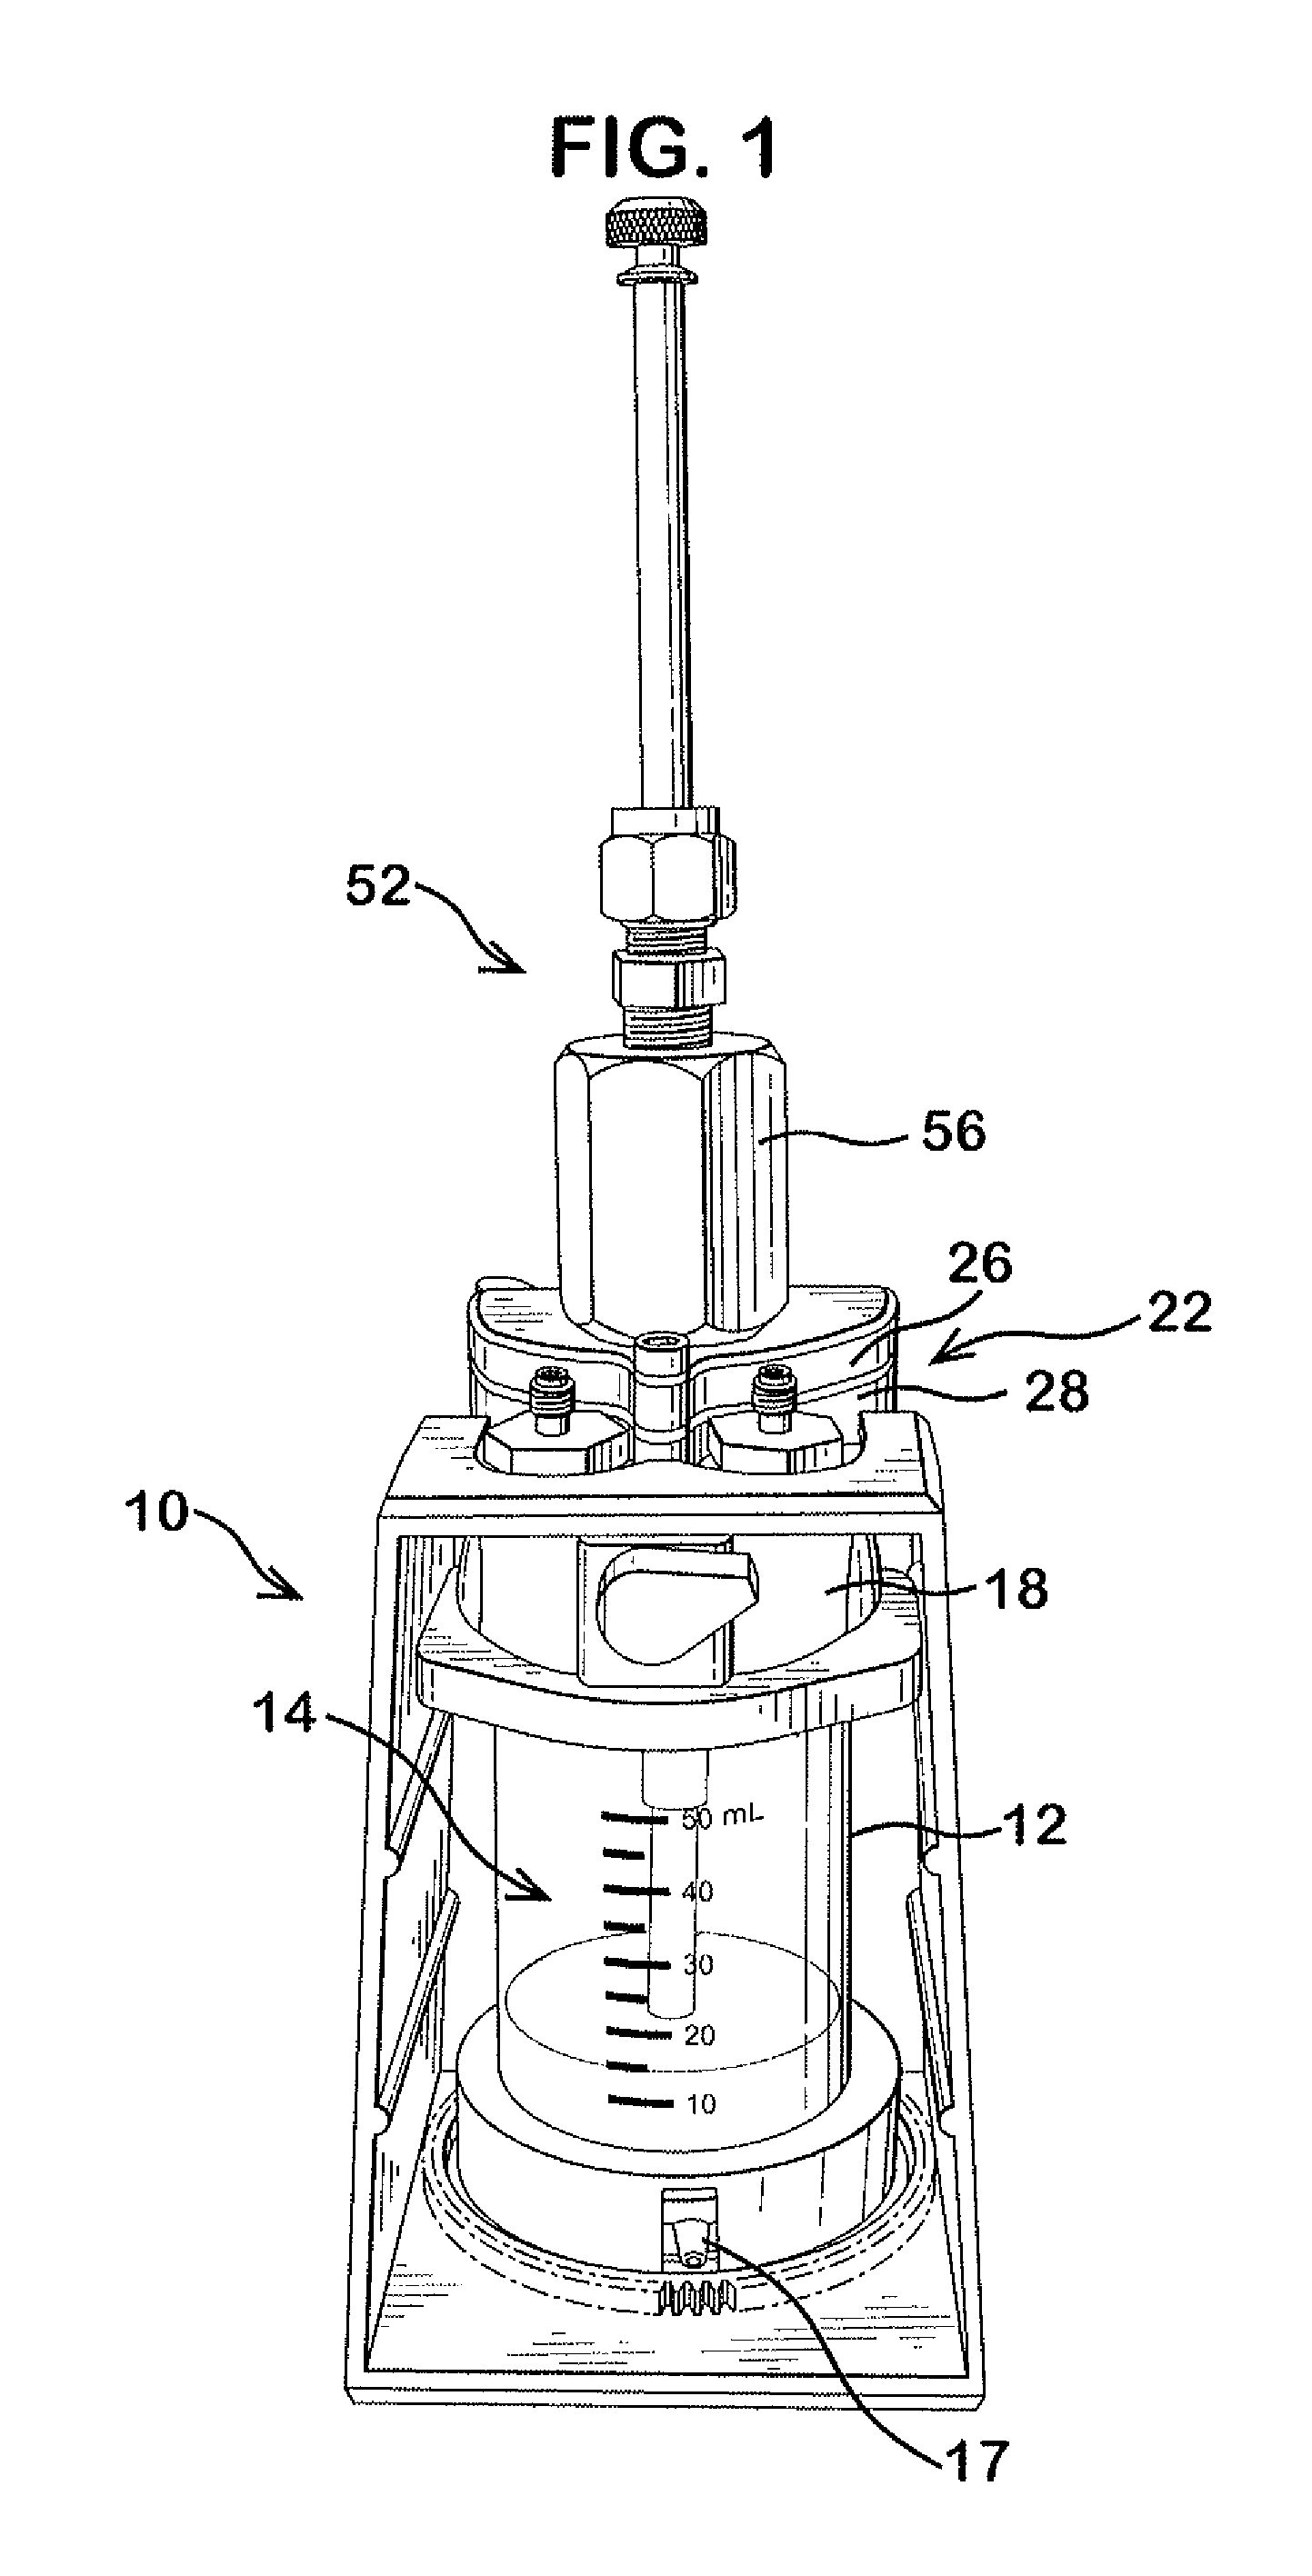 Delivery device for dispensing pharmaceutical dosage forms into dissolution testing apparatus